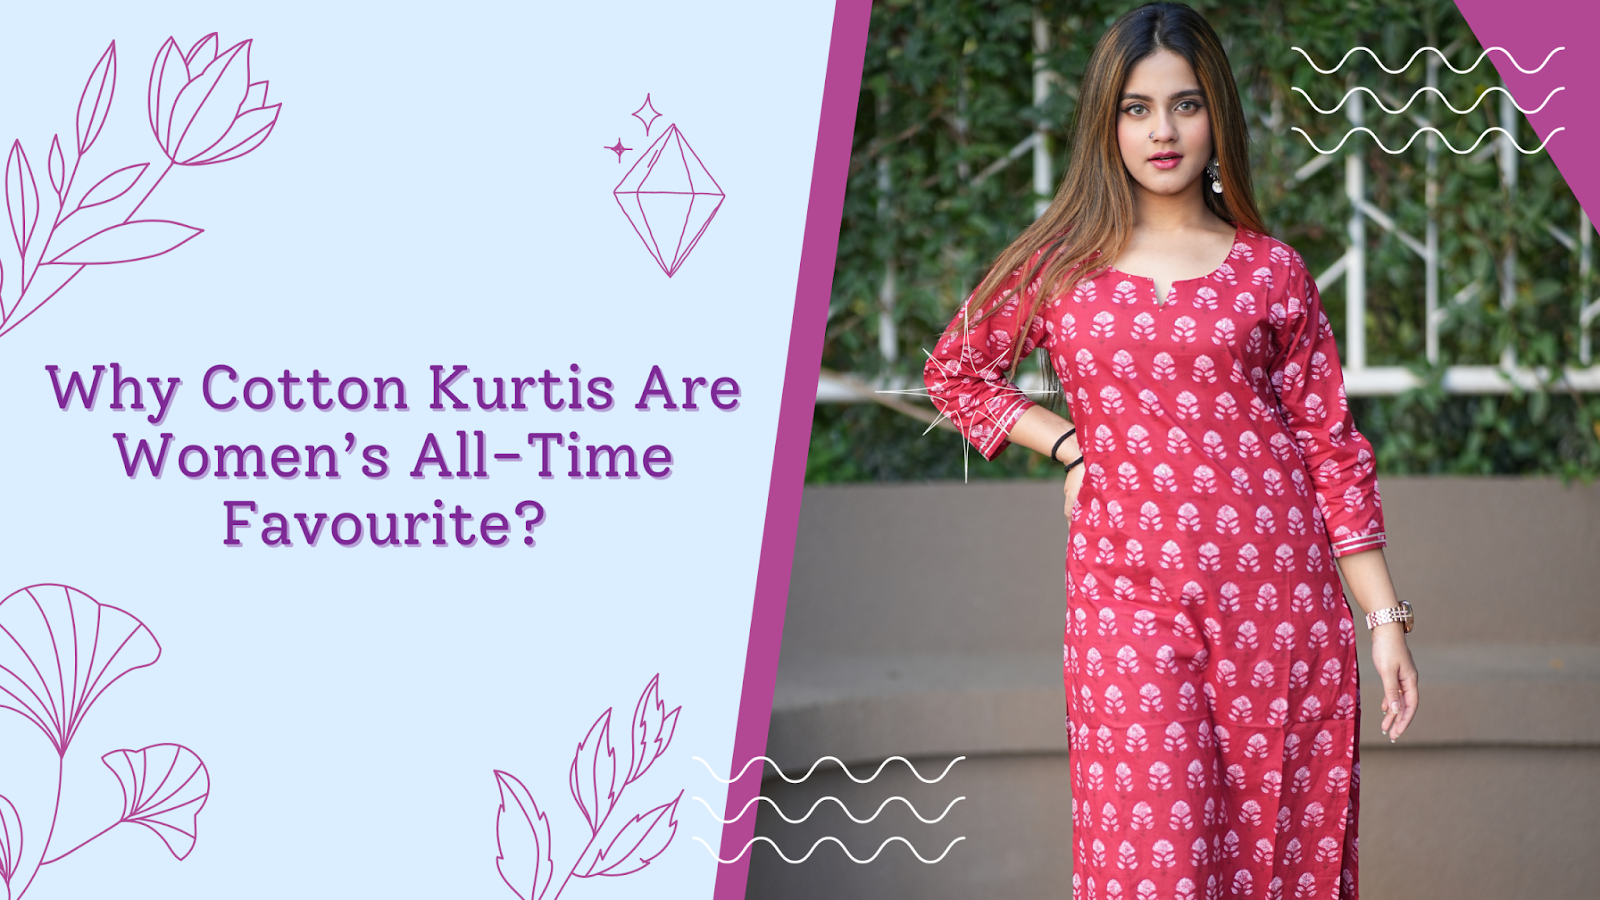 Why Cotton Kurtis Are Women’s All-Time Favourite?